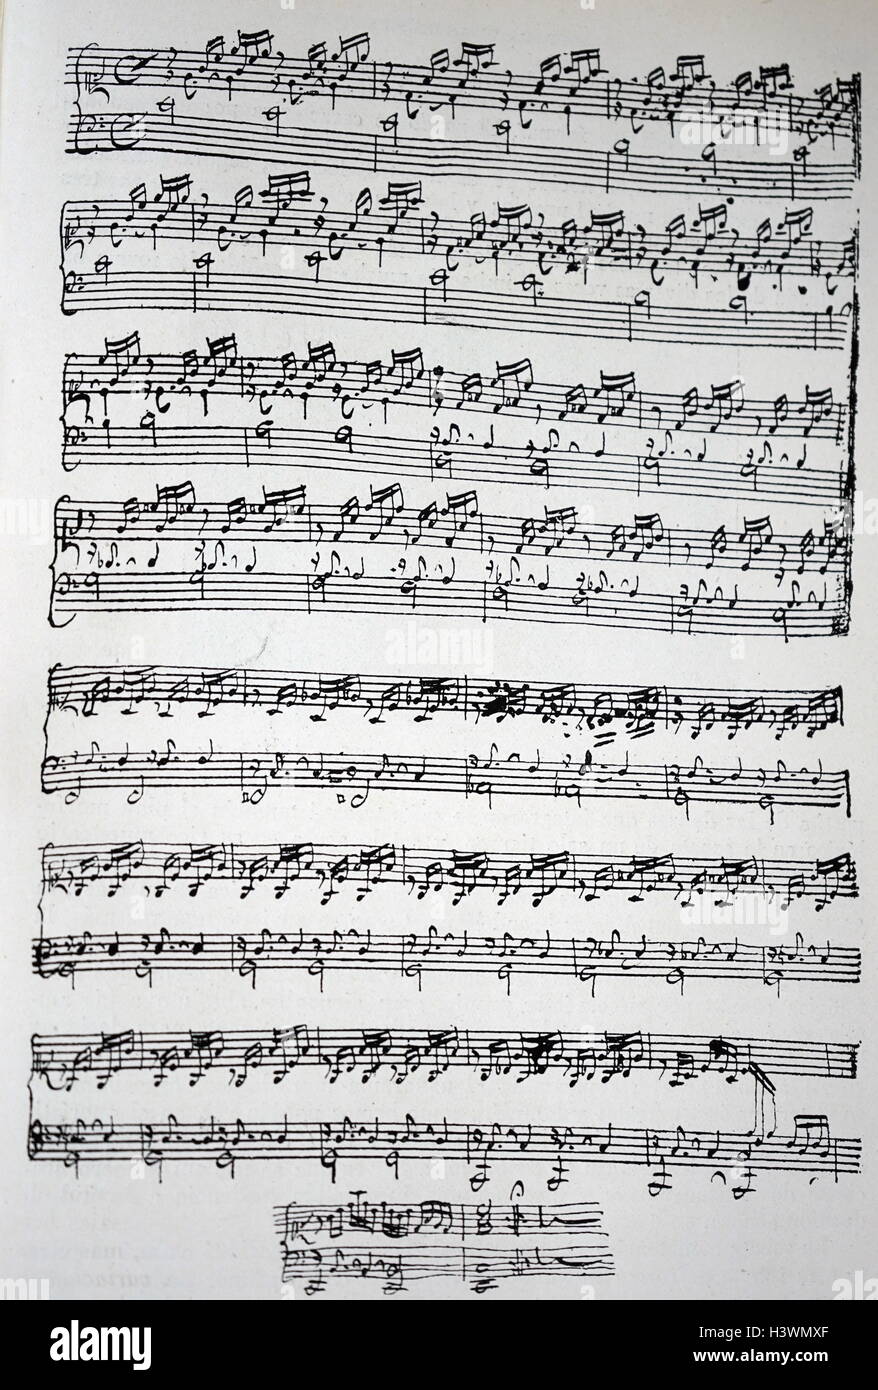 Sheet music by Johann Sebastian Bach (1685-1750) a German composer and musician of the Baroque period. Dated 18th Century Stock Photo